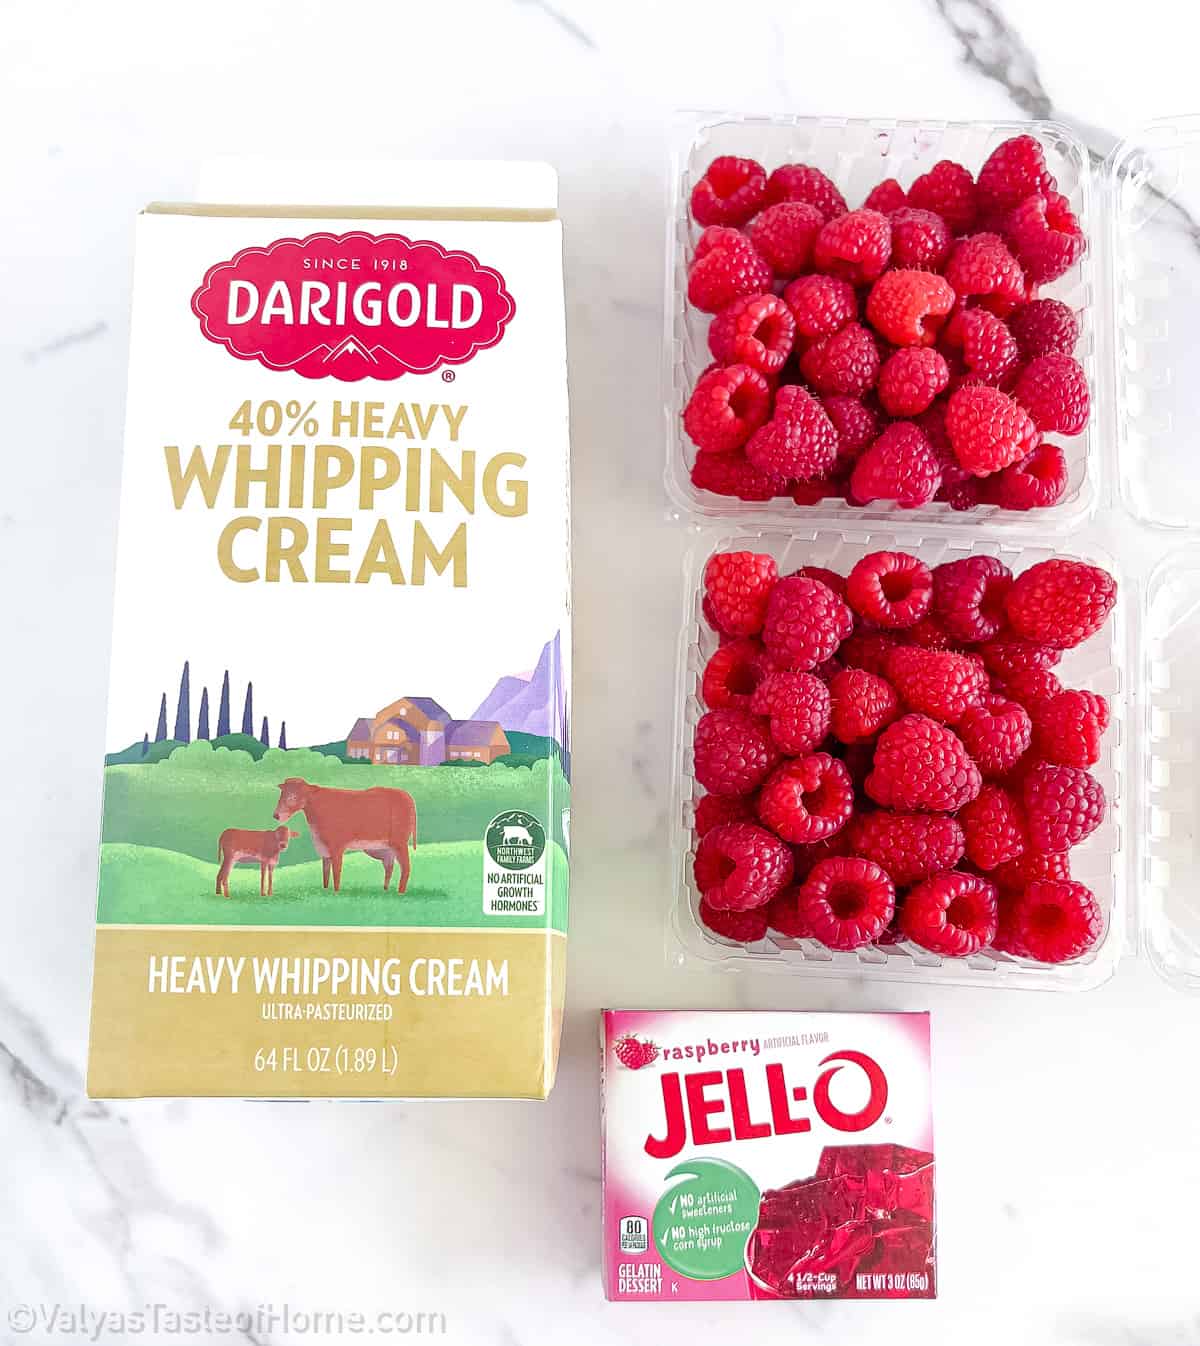 We will be using whipping cream, in order to make the raspberry frosting.